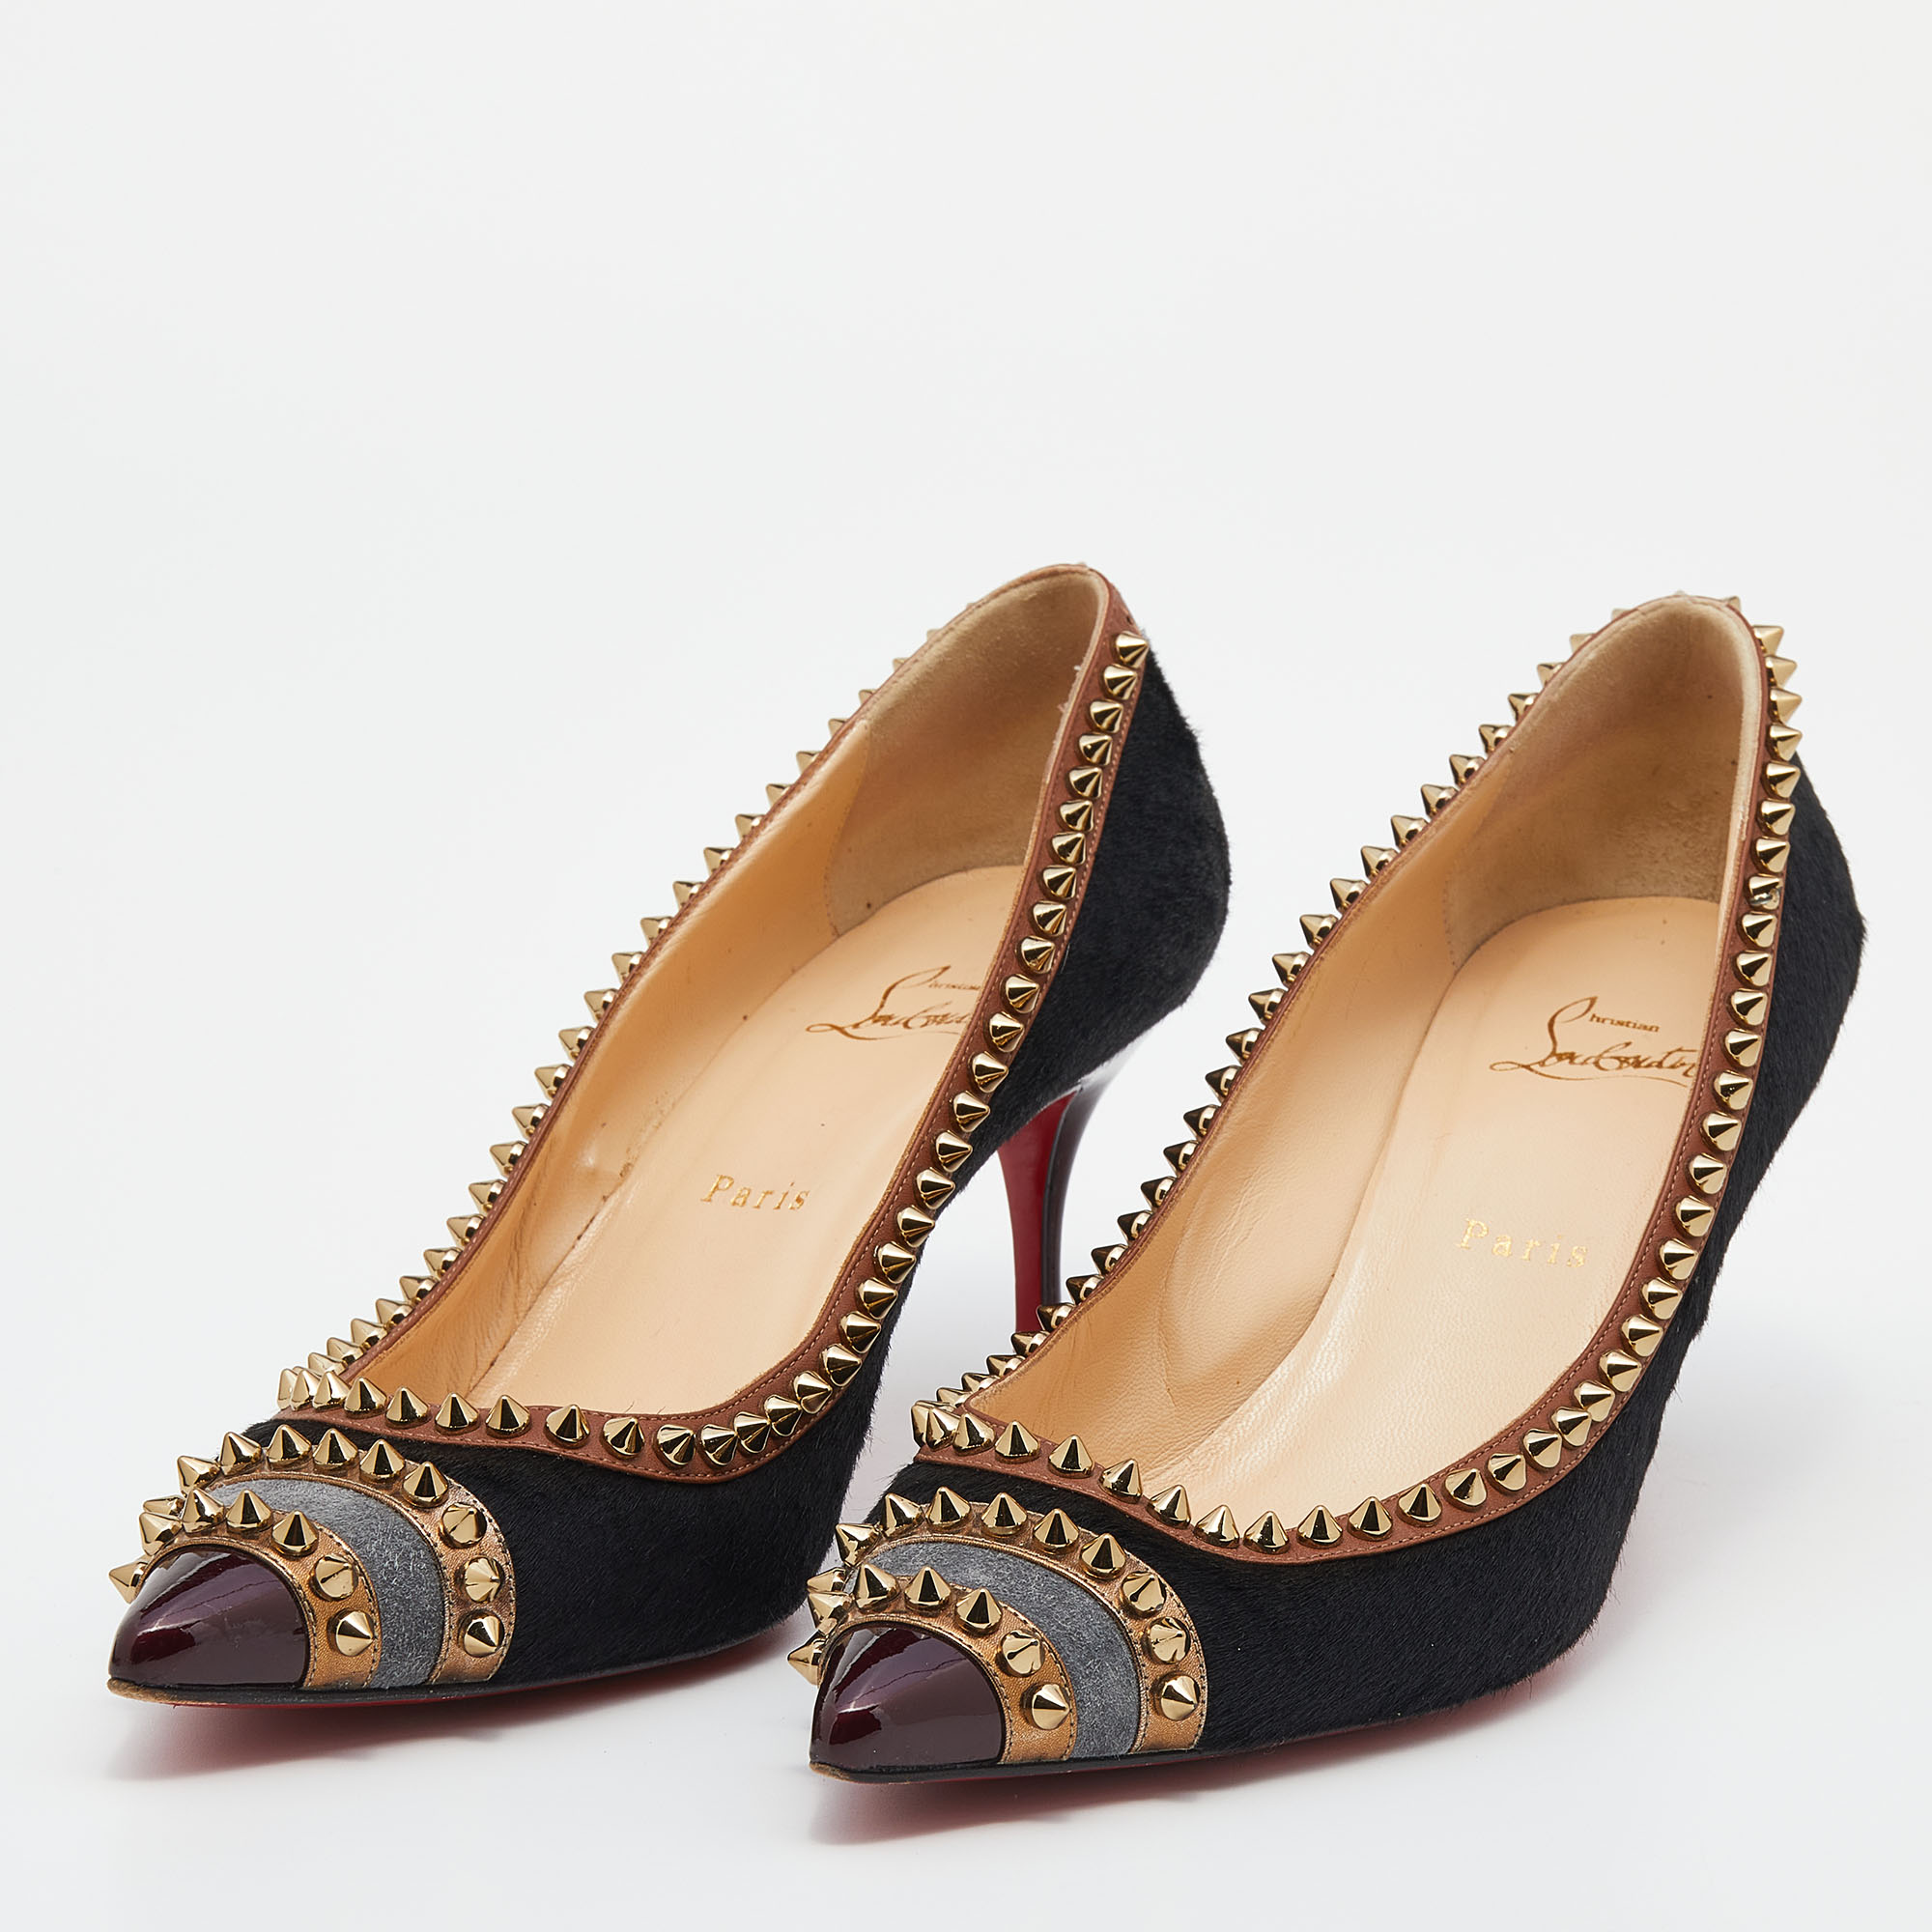 

Christian Louboutin Multicolor Calf Hair And Leather Malabar Hill Spiked Pumps Size